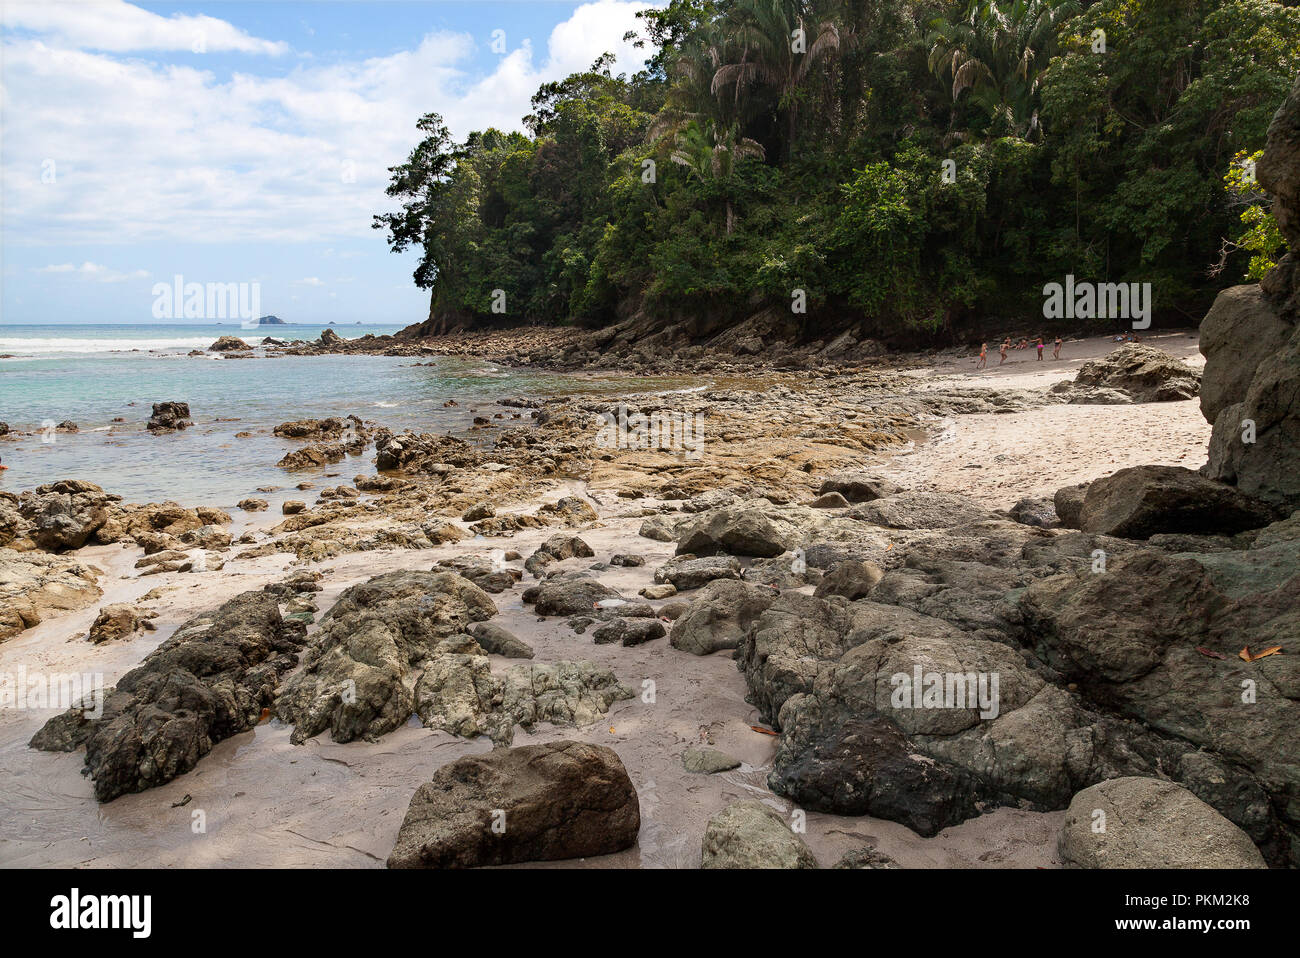 Rocks, sand and jungle in a small beach at the Manuel Antonio National Park in Costa Rica Stock Photo